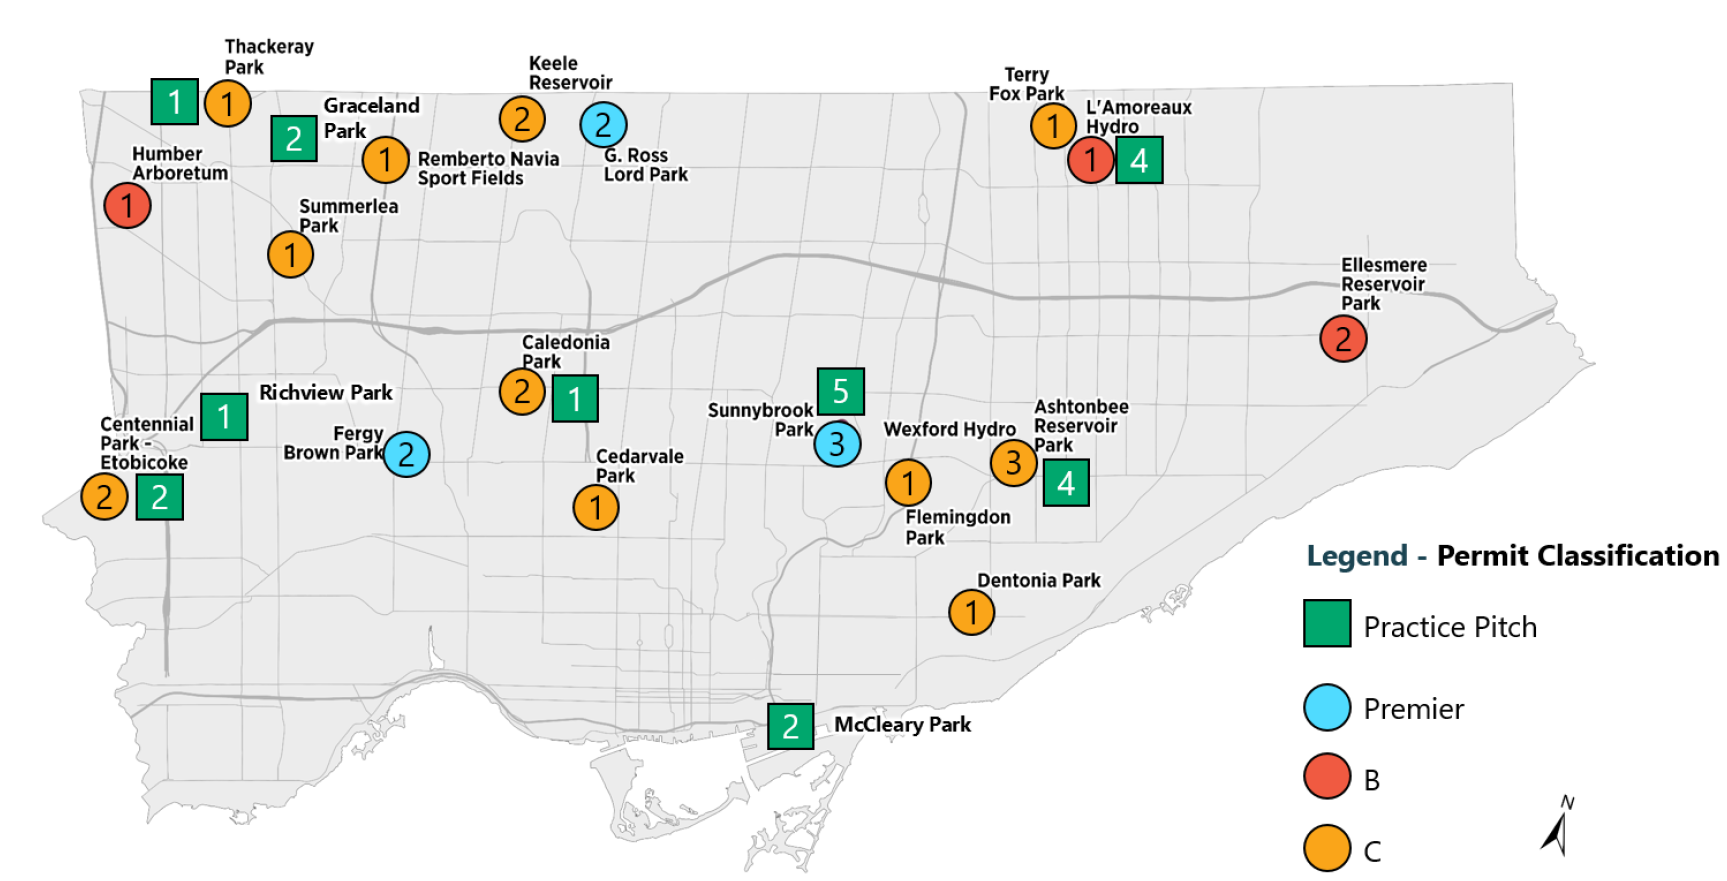 Updated for 2021: This is a map of Toronto that shows the number and types of cricket pitches that exist throughout the city. The City base-map is divided into the four boroughs of Scarborough, North York, Etobicoke, and East York/Downtown. There are three permit classifications of cricket pitch represented. Premier pitches are bright blue. B classification pitches are moss green, and C classification pitches are grey. The number of pitches in a park is represented by the size of the circle in that park. Smaller circles are one pitch, medium circles are two pitches, and large circles are three pitches. There are three parks with Premier pitches, three parks with B classification pitches, and eleven parks with C classification pitches. Below this map is a chart which contains the name and location of each park that contains cricket pitches, along with the number of pitches at that park. 